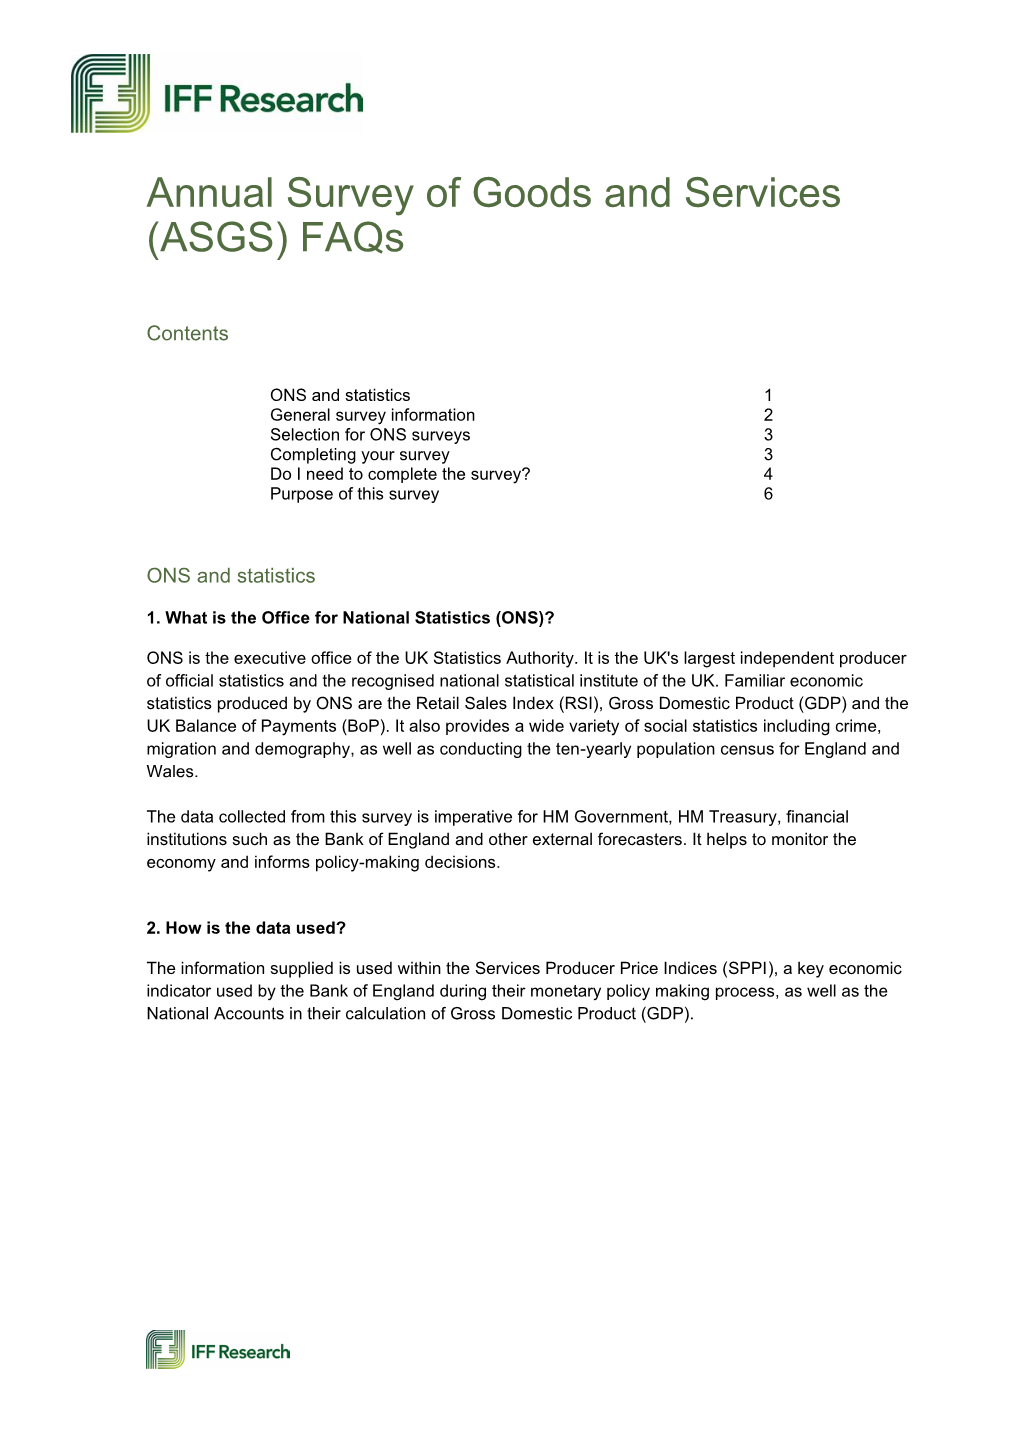 Annual Survey of Goods and Services (ASGS) Faqs